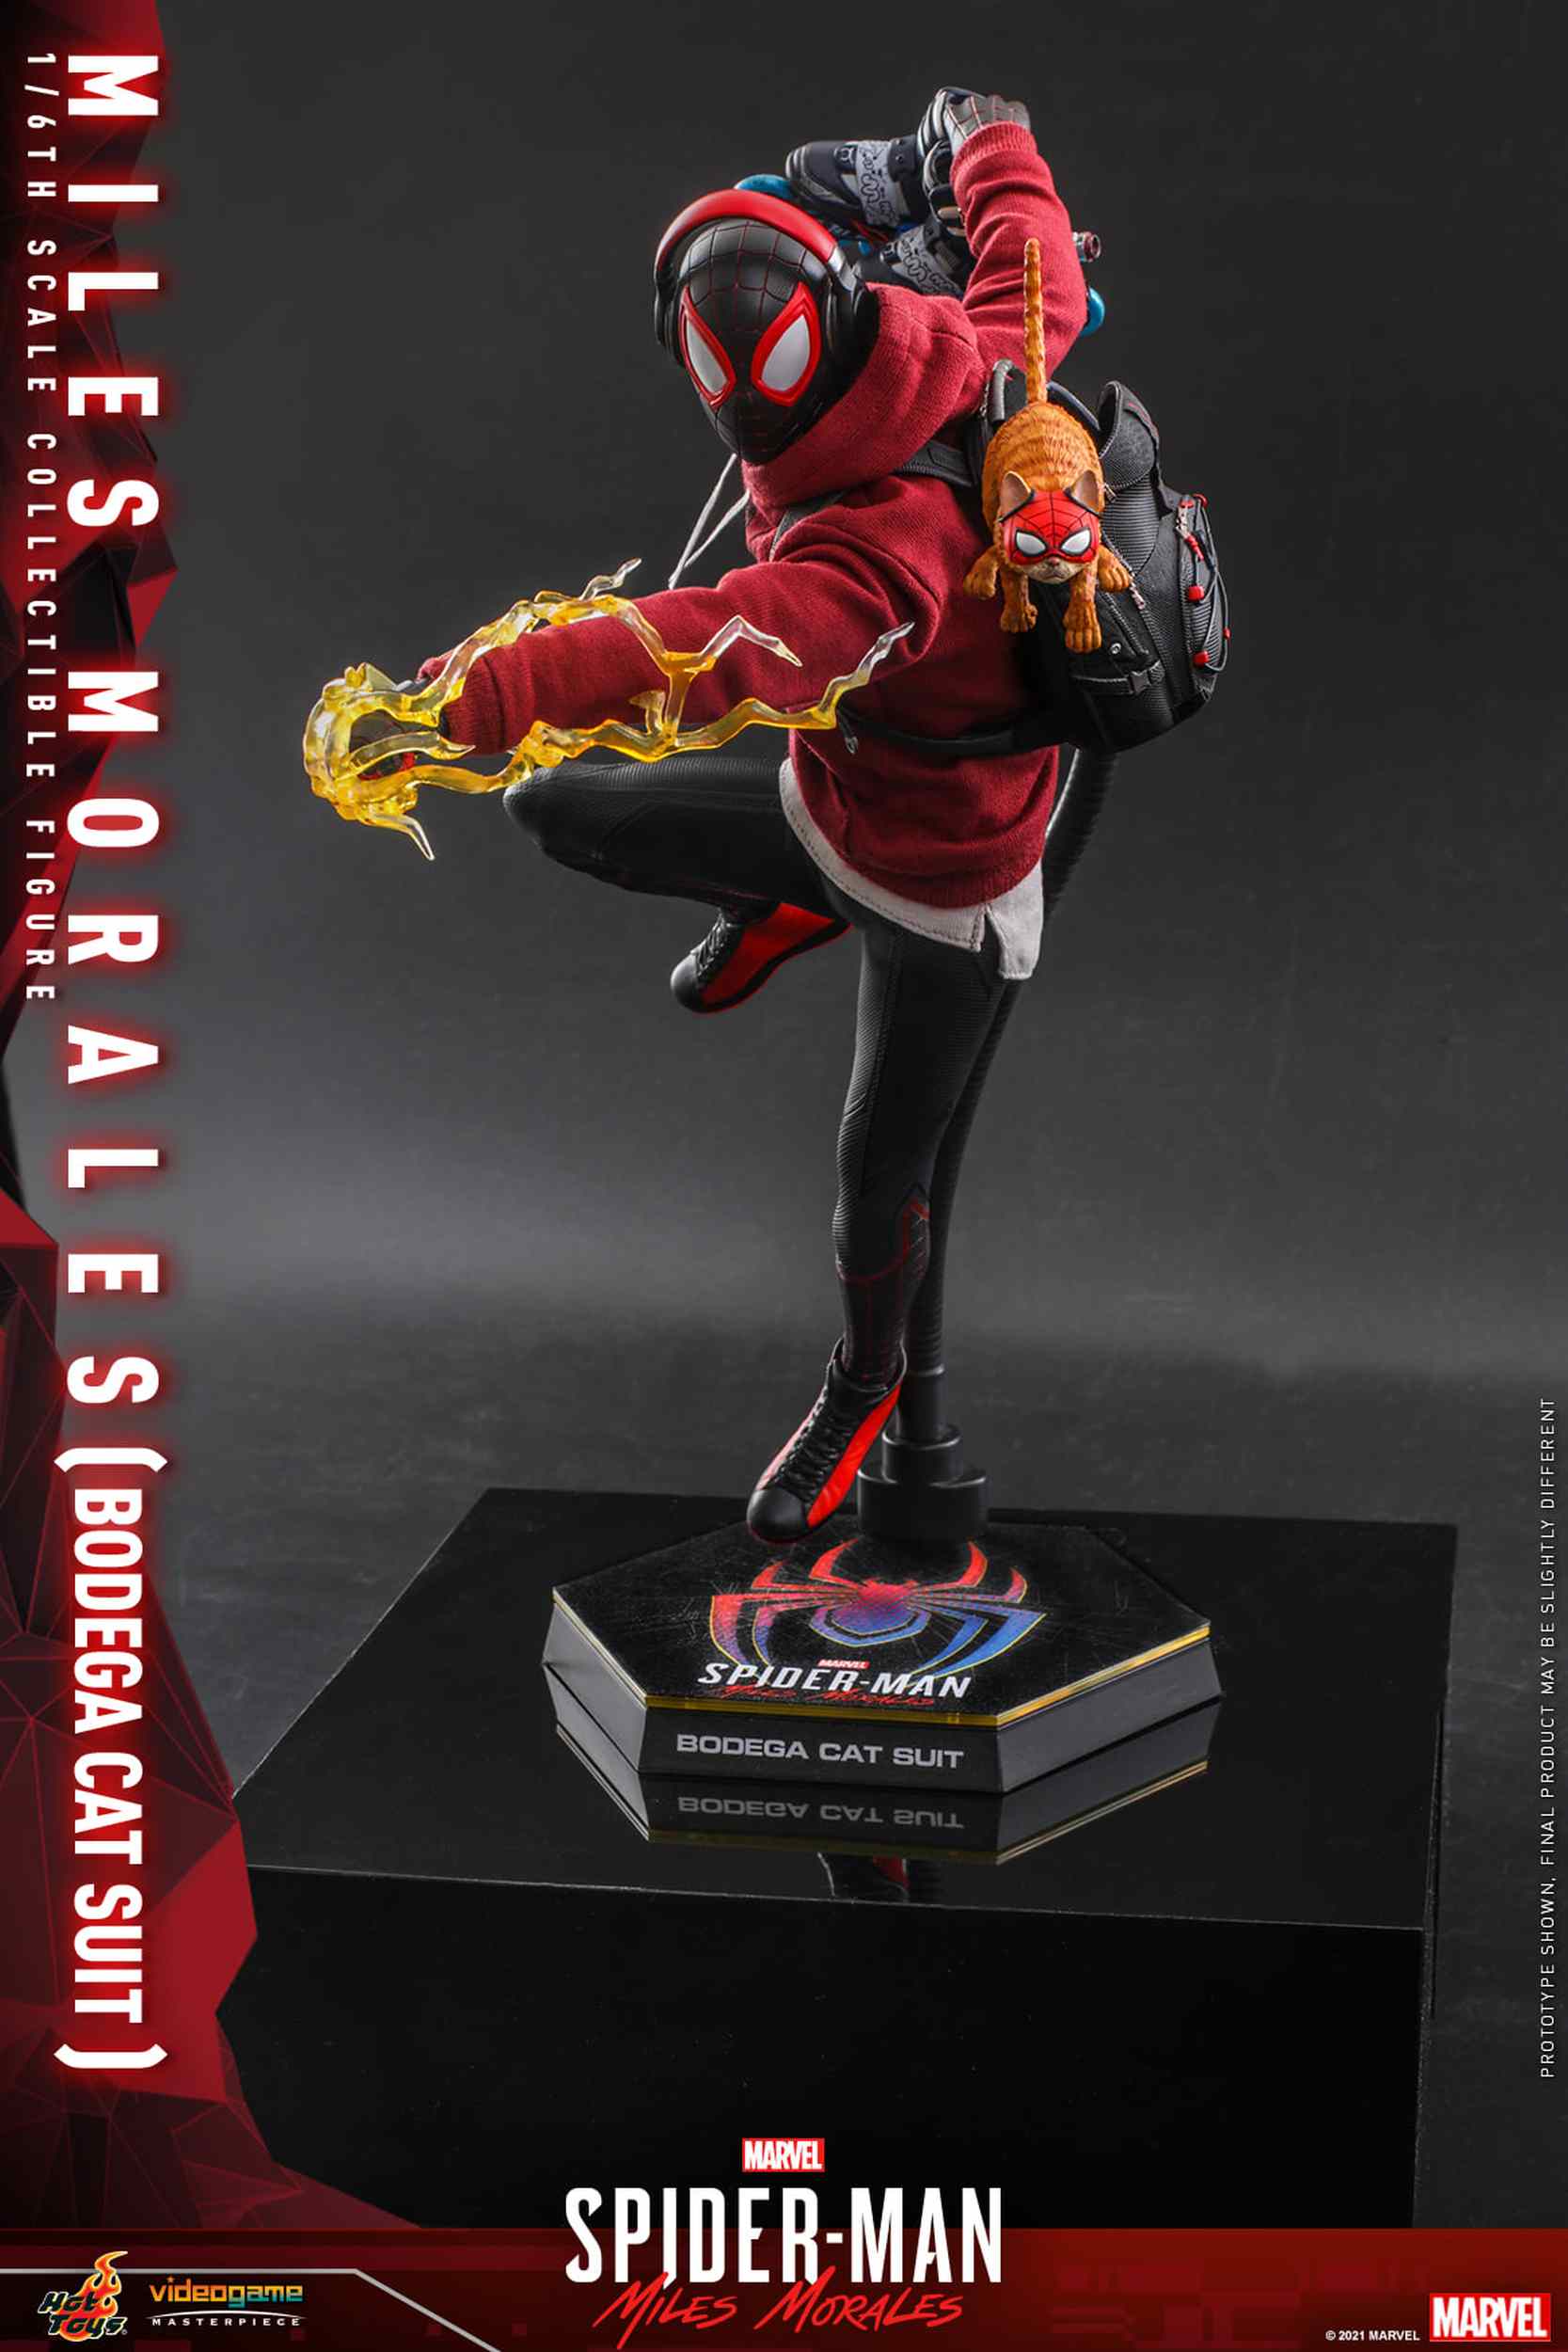 Hot Toys - Marvel’s Spider-Man: Miles Morales - Miles Morales (Bodega Cat Suit) 1/6th Scale Collectible Figure - YBMW